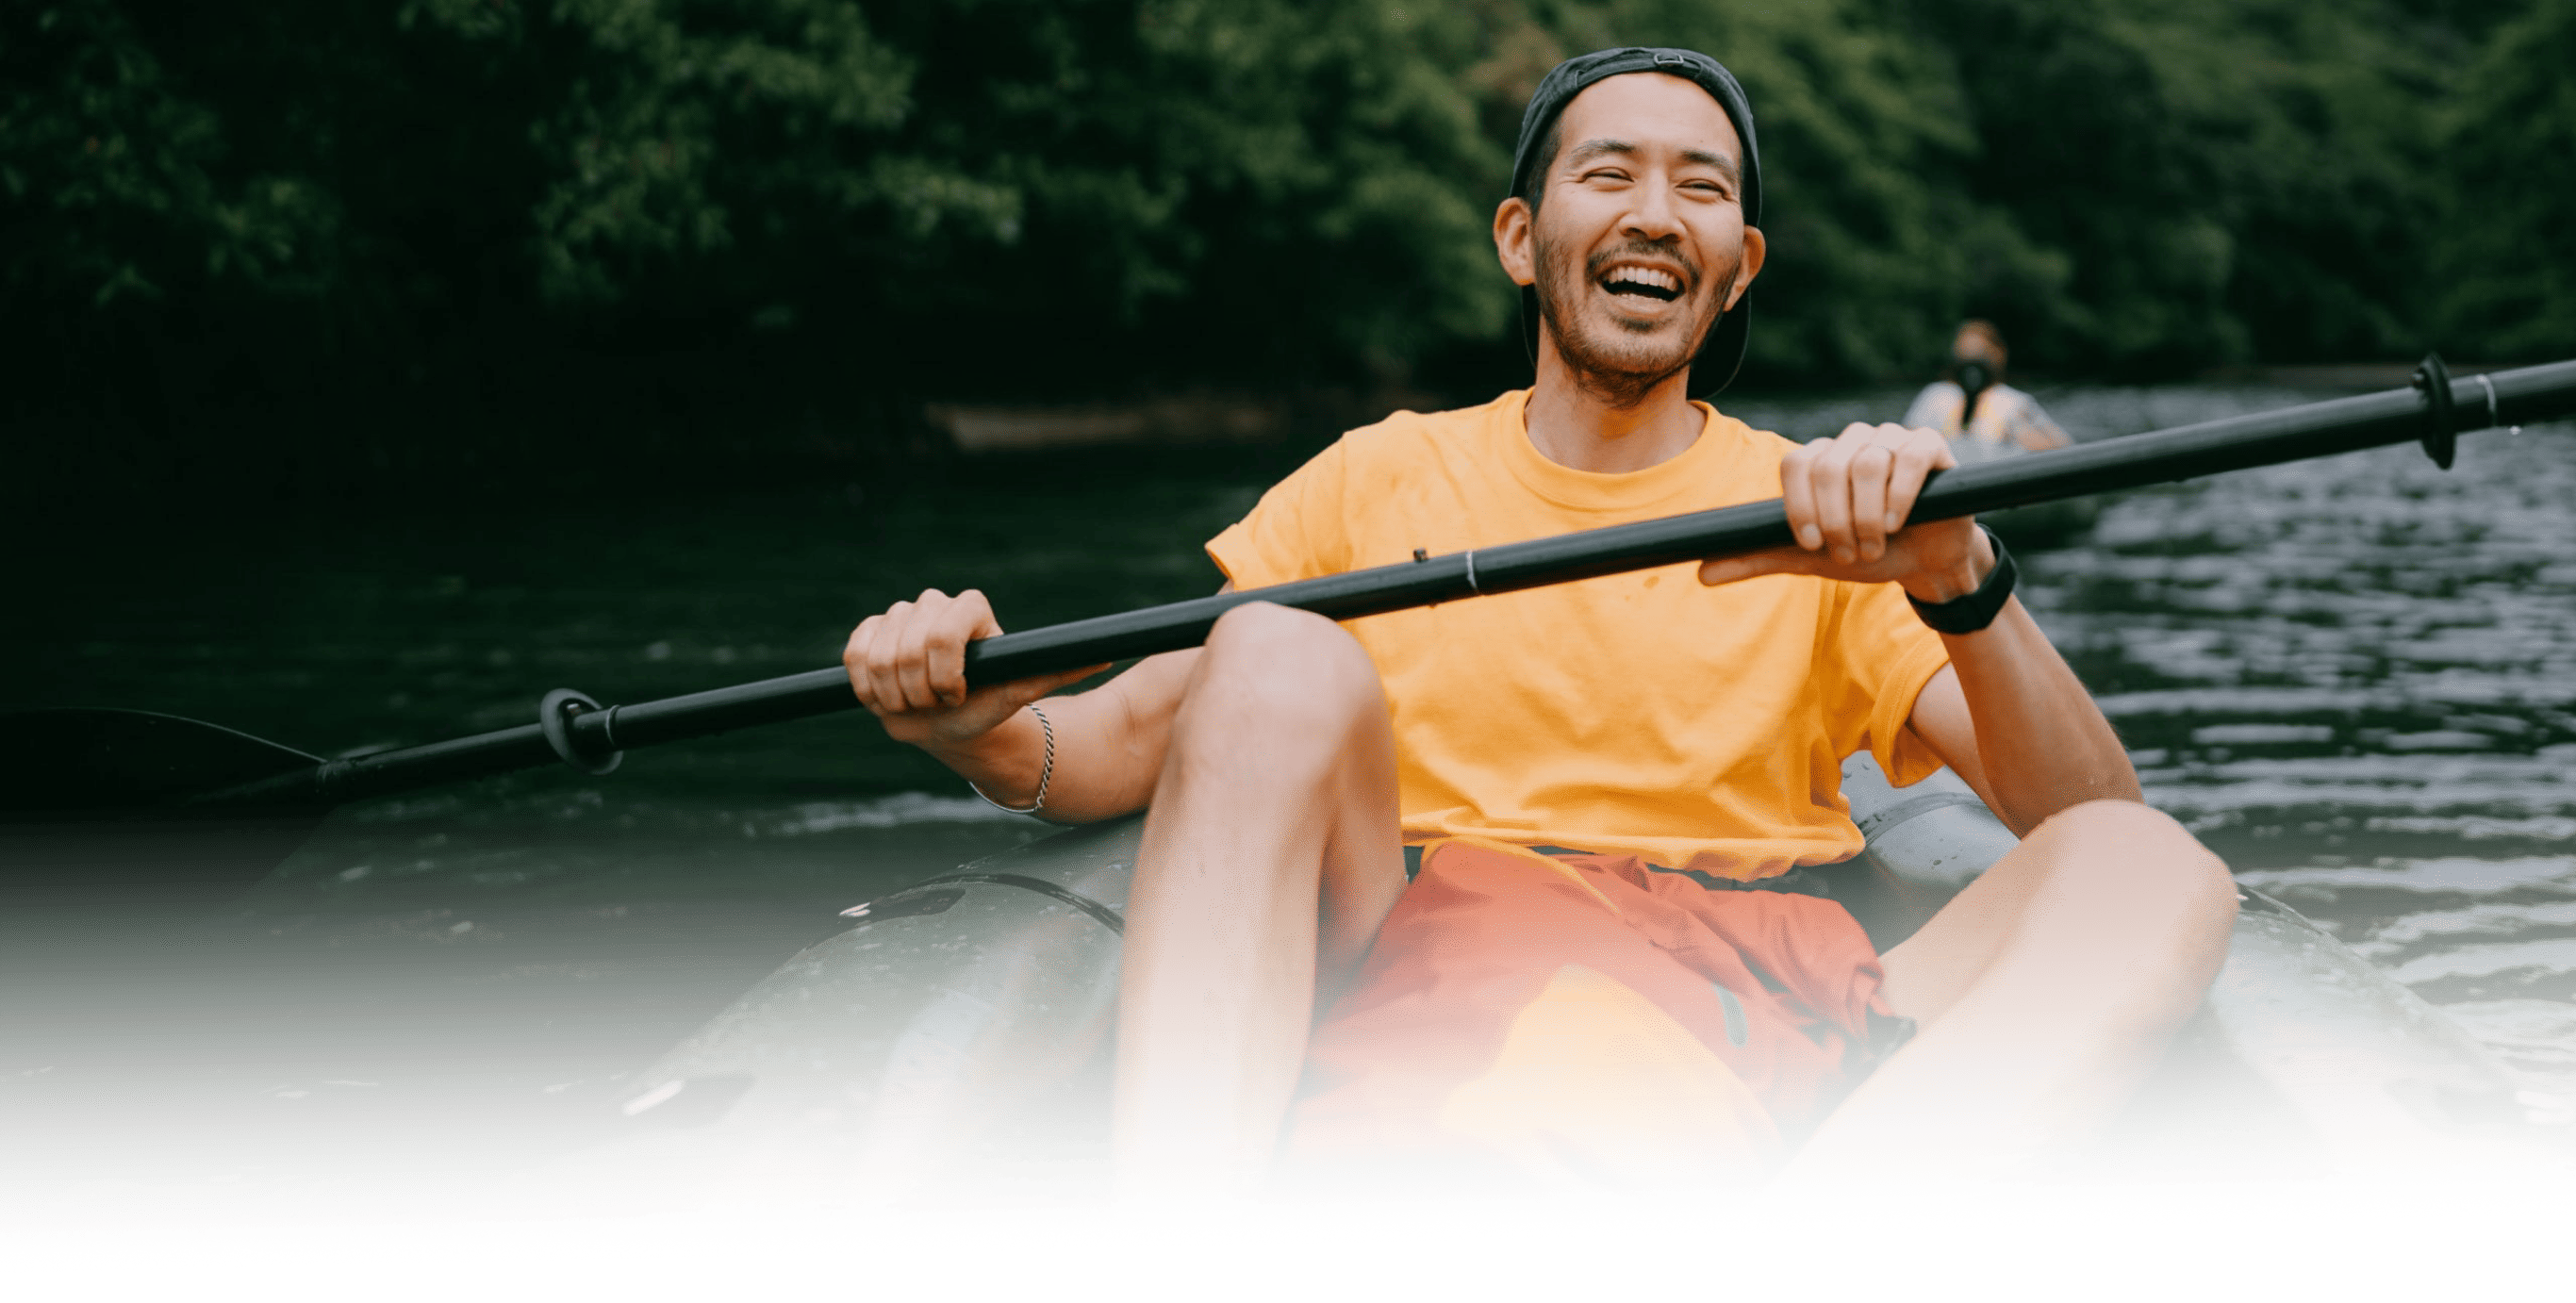 Man in a yellow shirt smiling while kayaking on a river holding a double-bladed paddle.